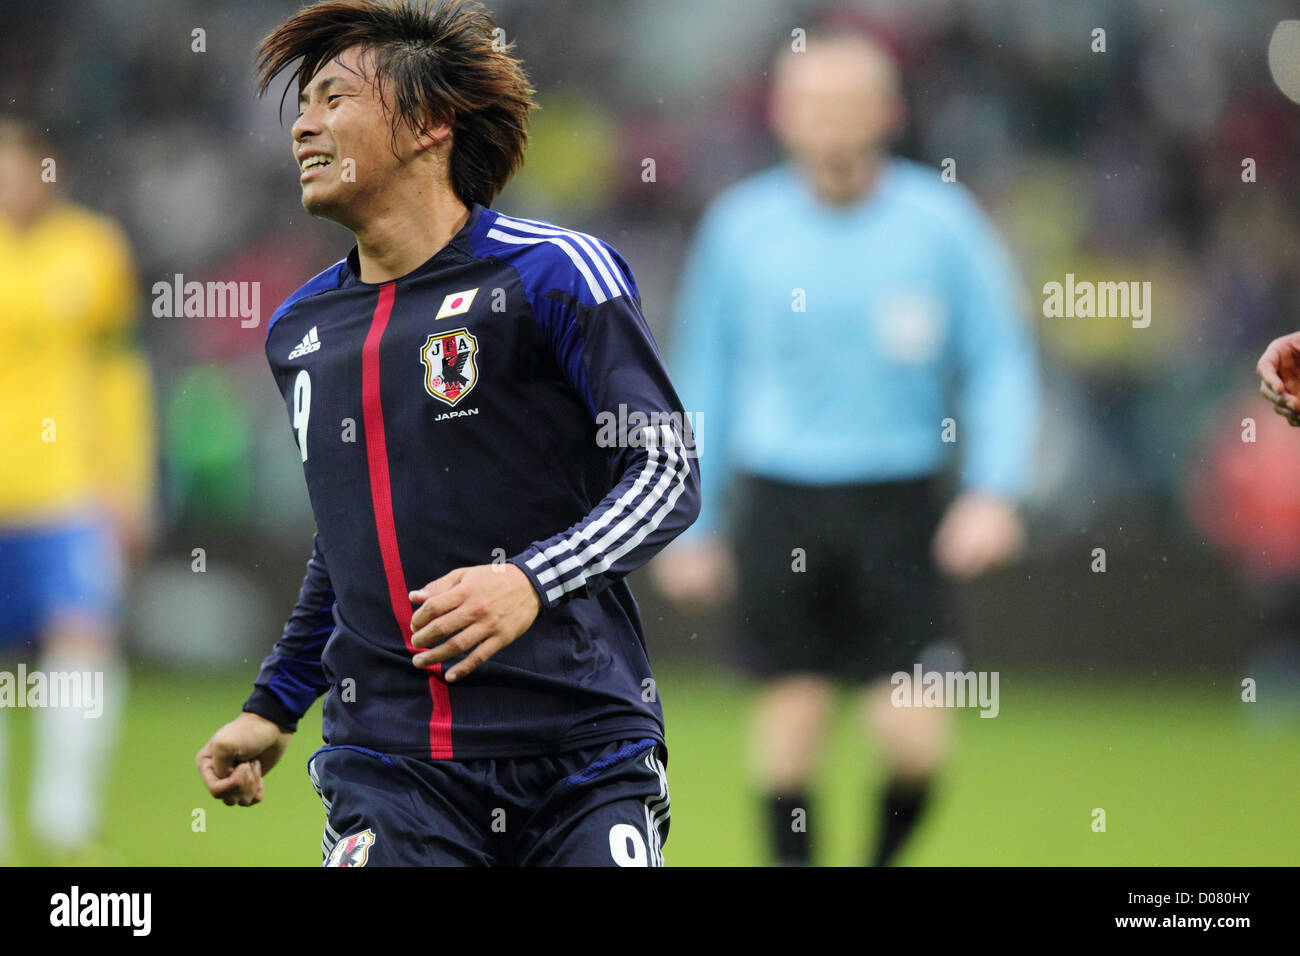 Takashi Inui (JPN),  OCTOBER 16, 2012 - Football / Soccer : Takashi Inui of Japan in action during the International Friendly Match between Japan - Brazil at Stadion Wroclaw, Wroclaw, Poland.  (Photo by AFLO) [2268] Stock Photo